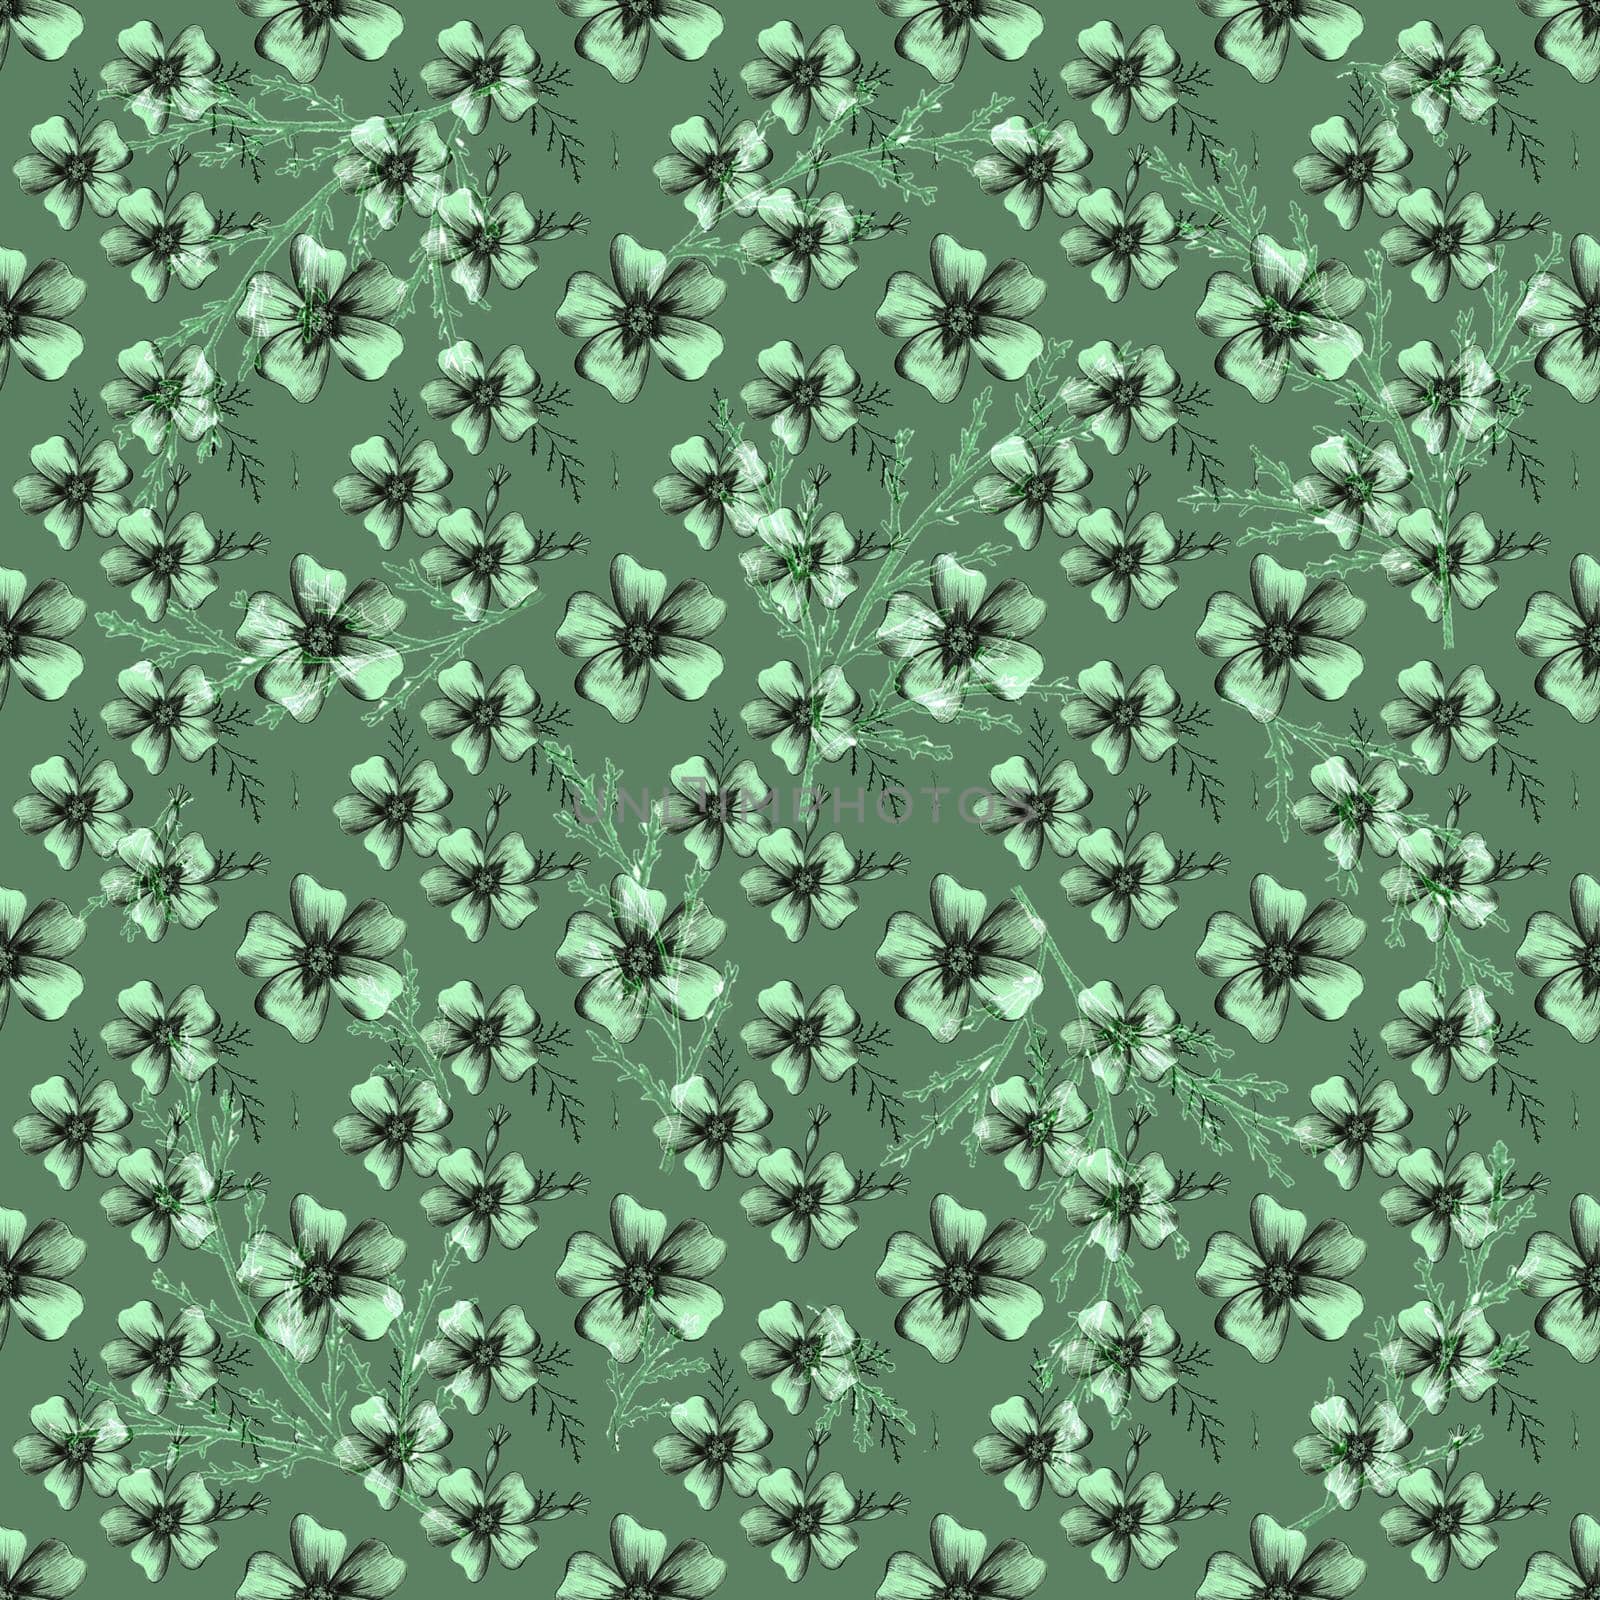 Seamless Pattern with Hand-Drawn Flower. Green Background with Thin-leaved Marigolds for Print, Design, Holiday, Wedding and Birthday Card.